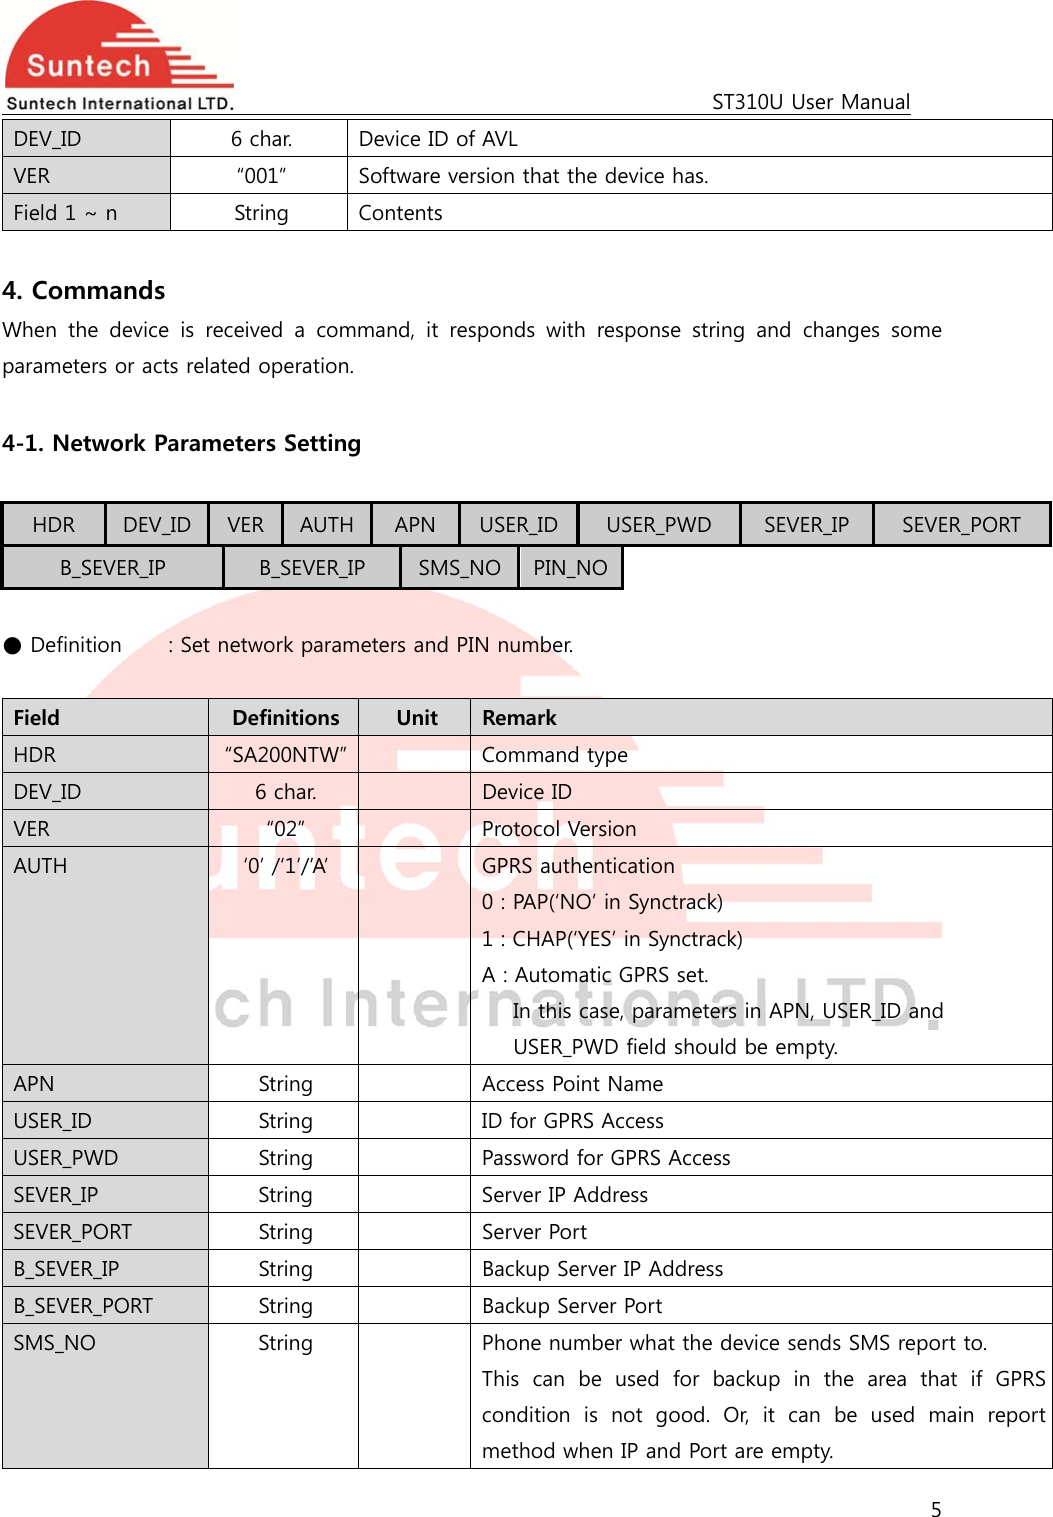                                                                                             ST310U User Manual 5  DEV_ID  6 char.  Device ID of AVL VER  “001”  Software version that the device has. Field 1 ~ n  String  Contents  4. Commands When  the  device  is  received  a  command,  it  responds  with  response  string  and  changes  some parameters or acts related operation.  4-1. Network Parameters Setting  HDR  DEV_ID  VER  AUTH  APN  USER_ID USER_PWD  SEVER_IP  SEVER_PORT B_SEVER_IP  B_SEVER_IP  SMS_NO PIN_NO ● Definition   : Set network parameters and PIN number.  Field  Definitions  Unit  Remark HDR  “SA200NTW”    Command type DEV_ID  6 char.    Device ID VER  “02”    Protocol Version AUTH  ‘0’ /‘1’/’A’    GPRS authentication 0 : PAP(‘NO’ in Synctrack) 1 : CHAP(‘YES’ in Synctrack) A : Automatic GPRS set.  In this case, parameters in APN, USER_ID and   USER_PWD field should be empty. APN  String    Access Point Name USER_ID  String    ID for GPRS Access USER_PWD  String    Password for GPRS Access SEVER_IP  String    Server IP Address SEVER_PORT  String    Server Port B_SEVER_IP  String    Backup Server IP Address B_SEVER_PORT  String    Backup Server Port SMS_NO  String    Phone number what the device sends SMS report to. This can be used for backup in the area that if GPRS condition  is  not  good.  Or,  it  can  be  used  main  report method when IP and Port are empty. 